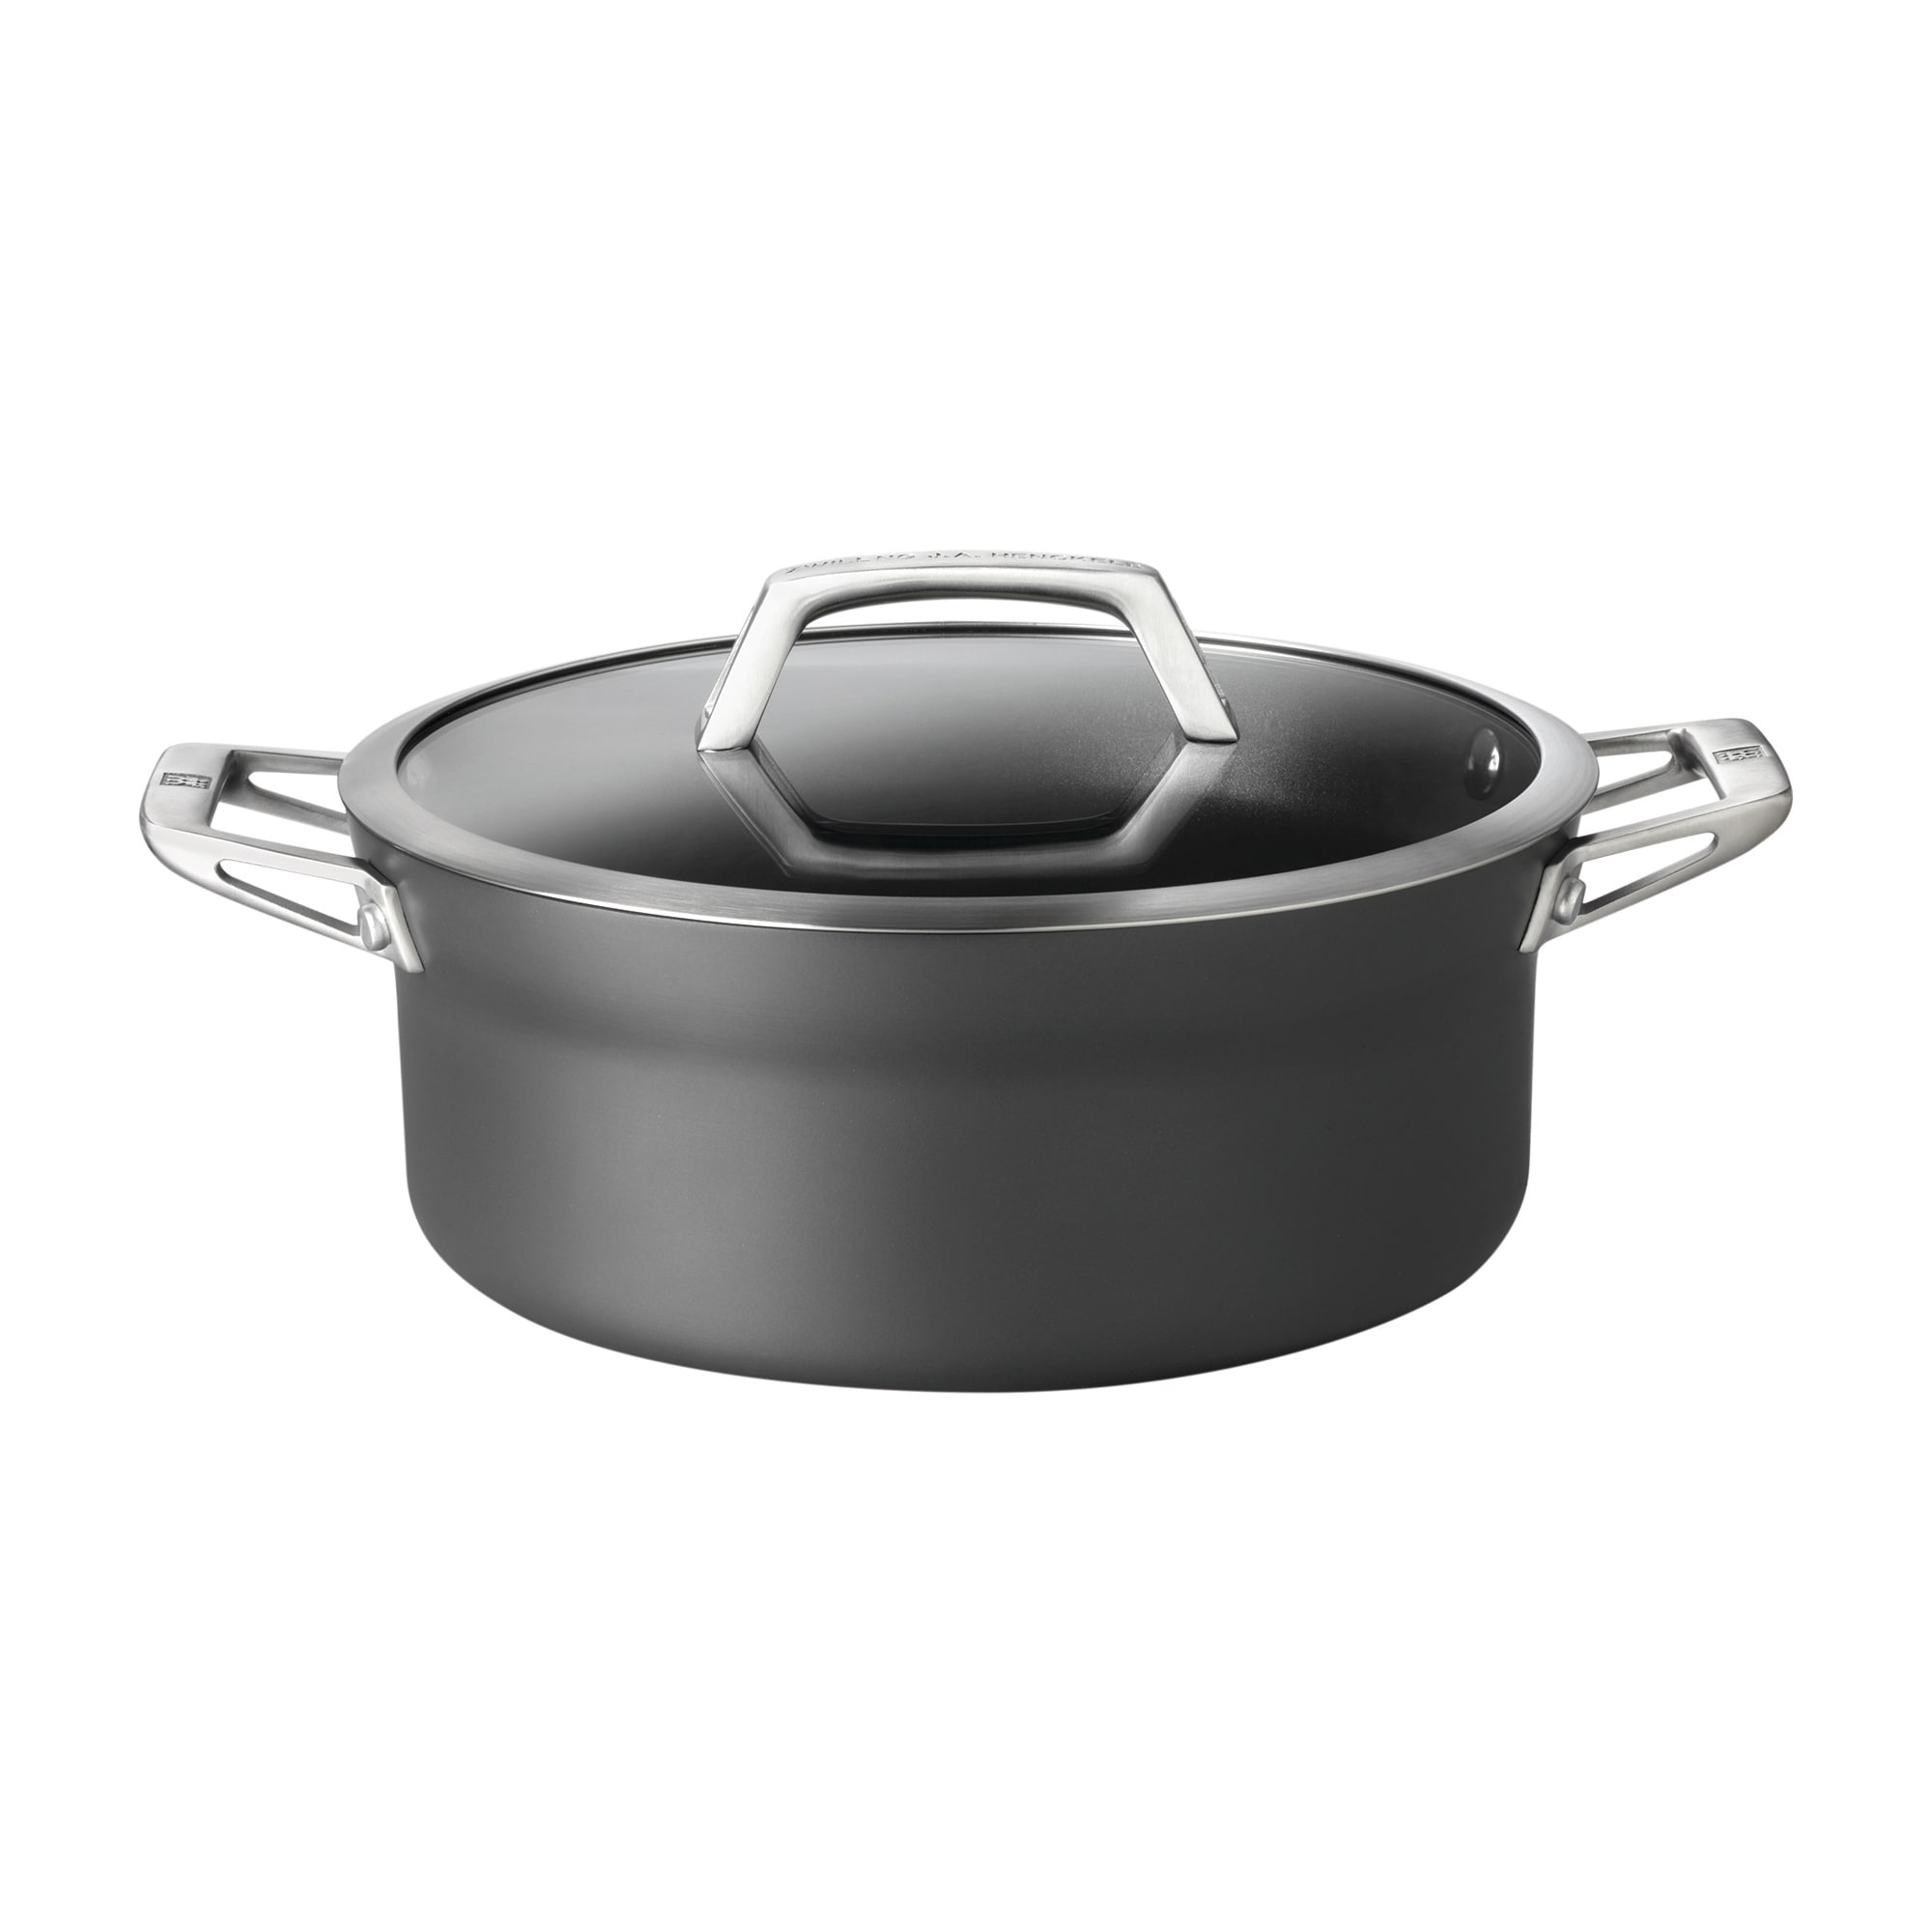 ZWILLING Motion Hard Anodized Aluminum Nonstick Dutch Oven - Bed